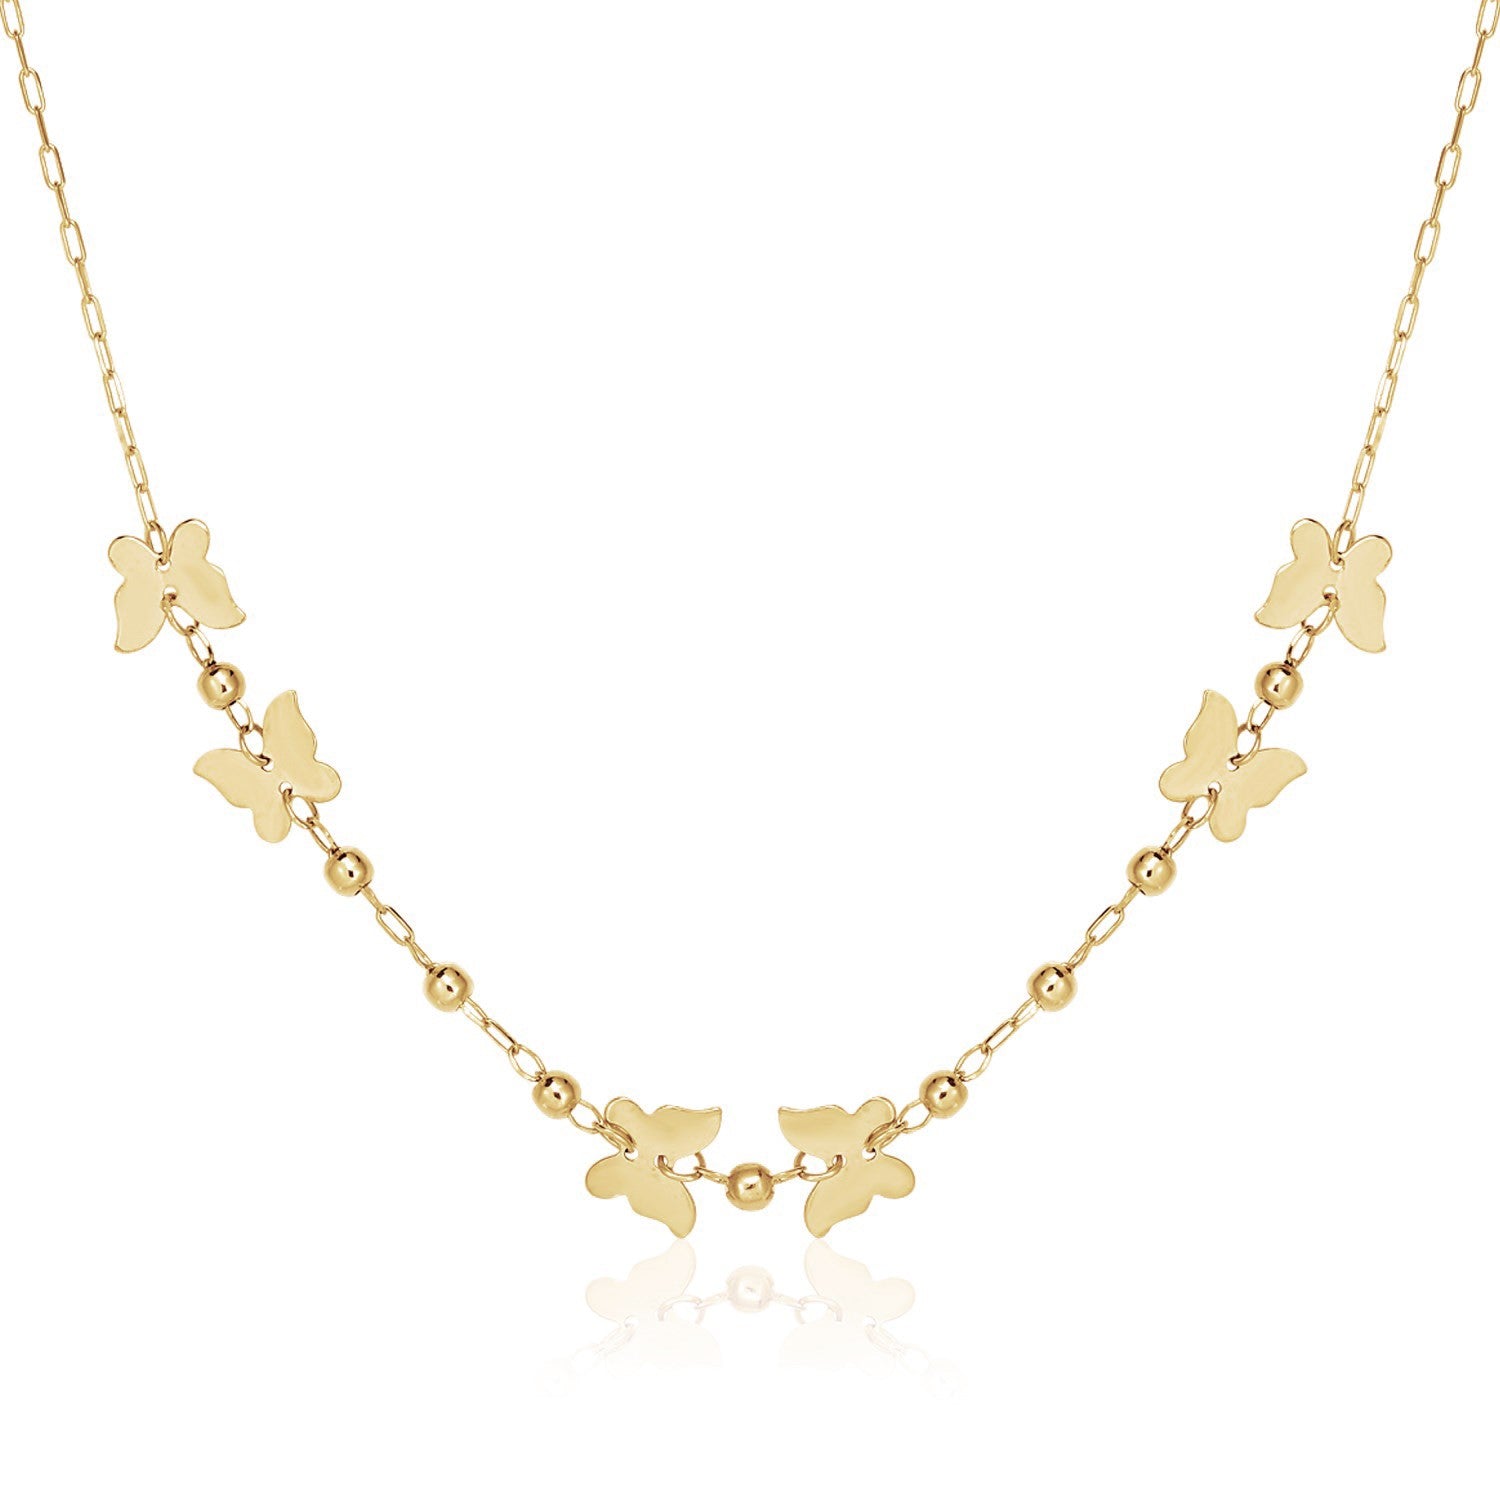 14k Yellow Gold 18 inch Necklace with Polished Butterflies and Beads freeshipping - Higher Class Elegance